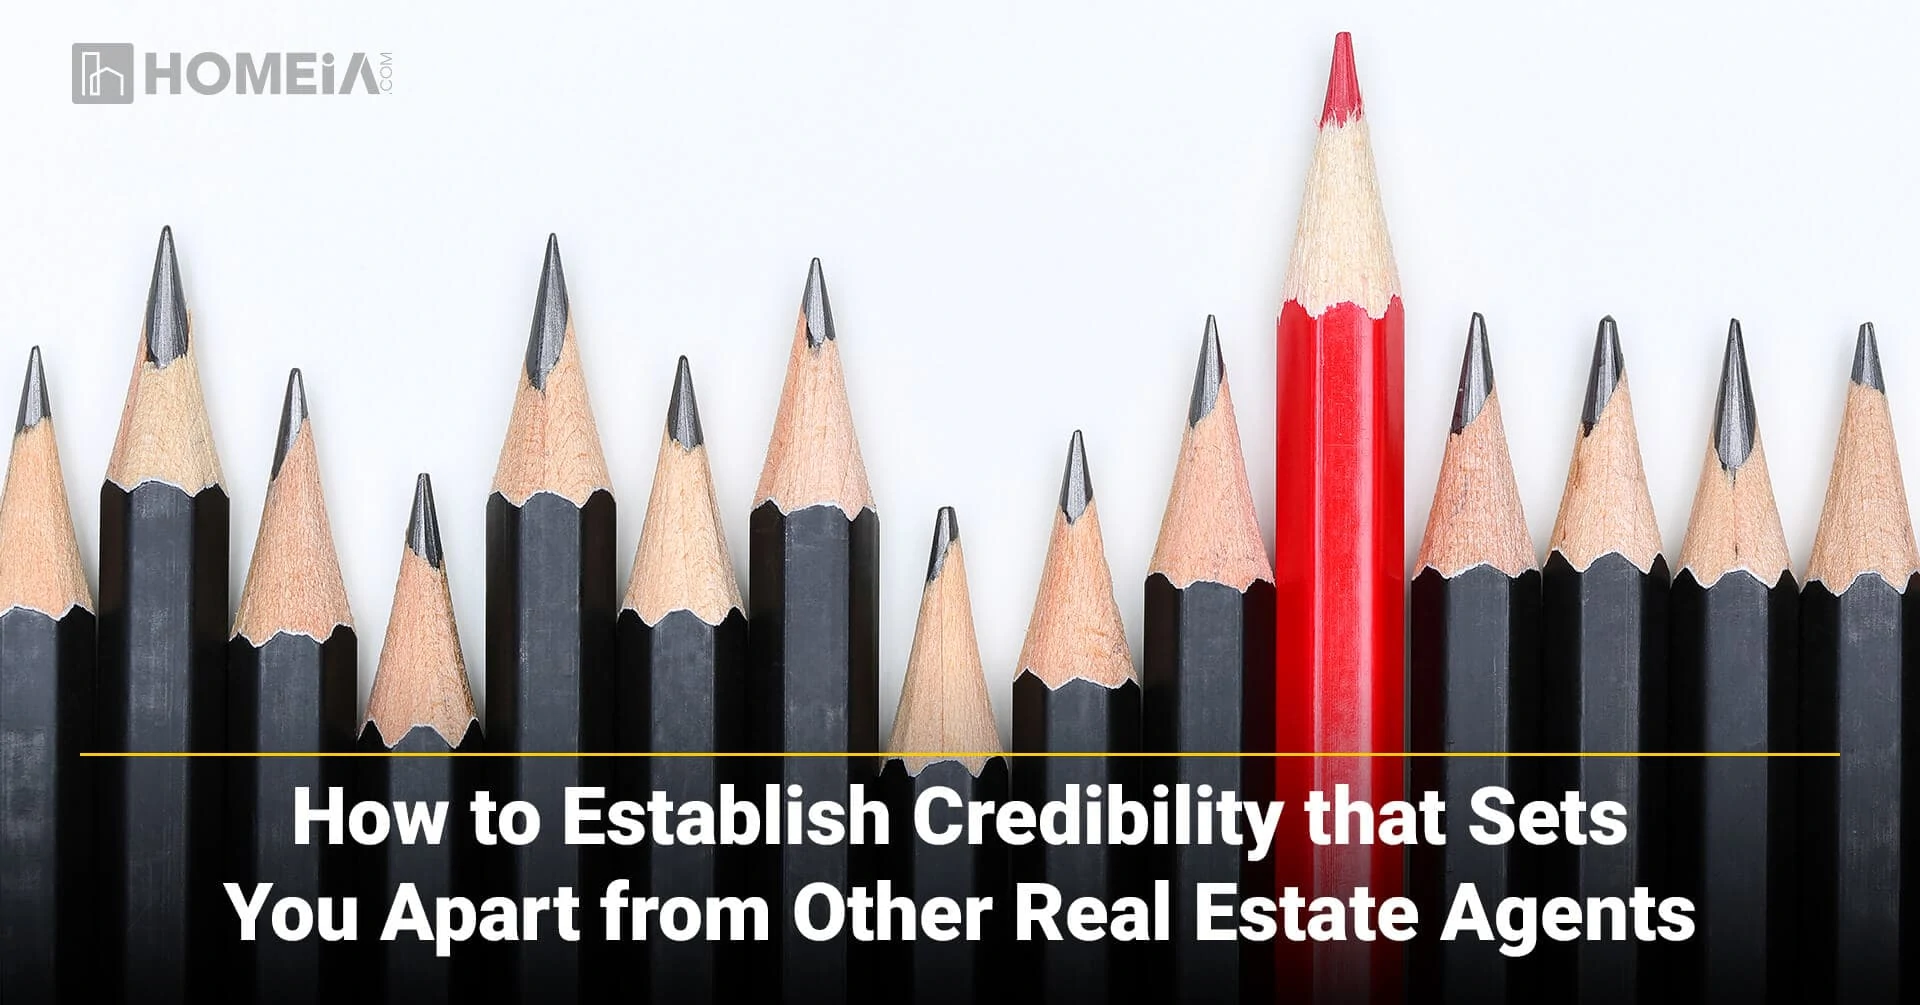 How to Establish Credibility that Sets You Apart from Other Real Estate Agents